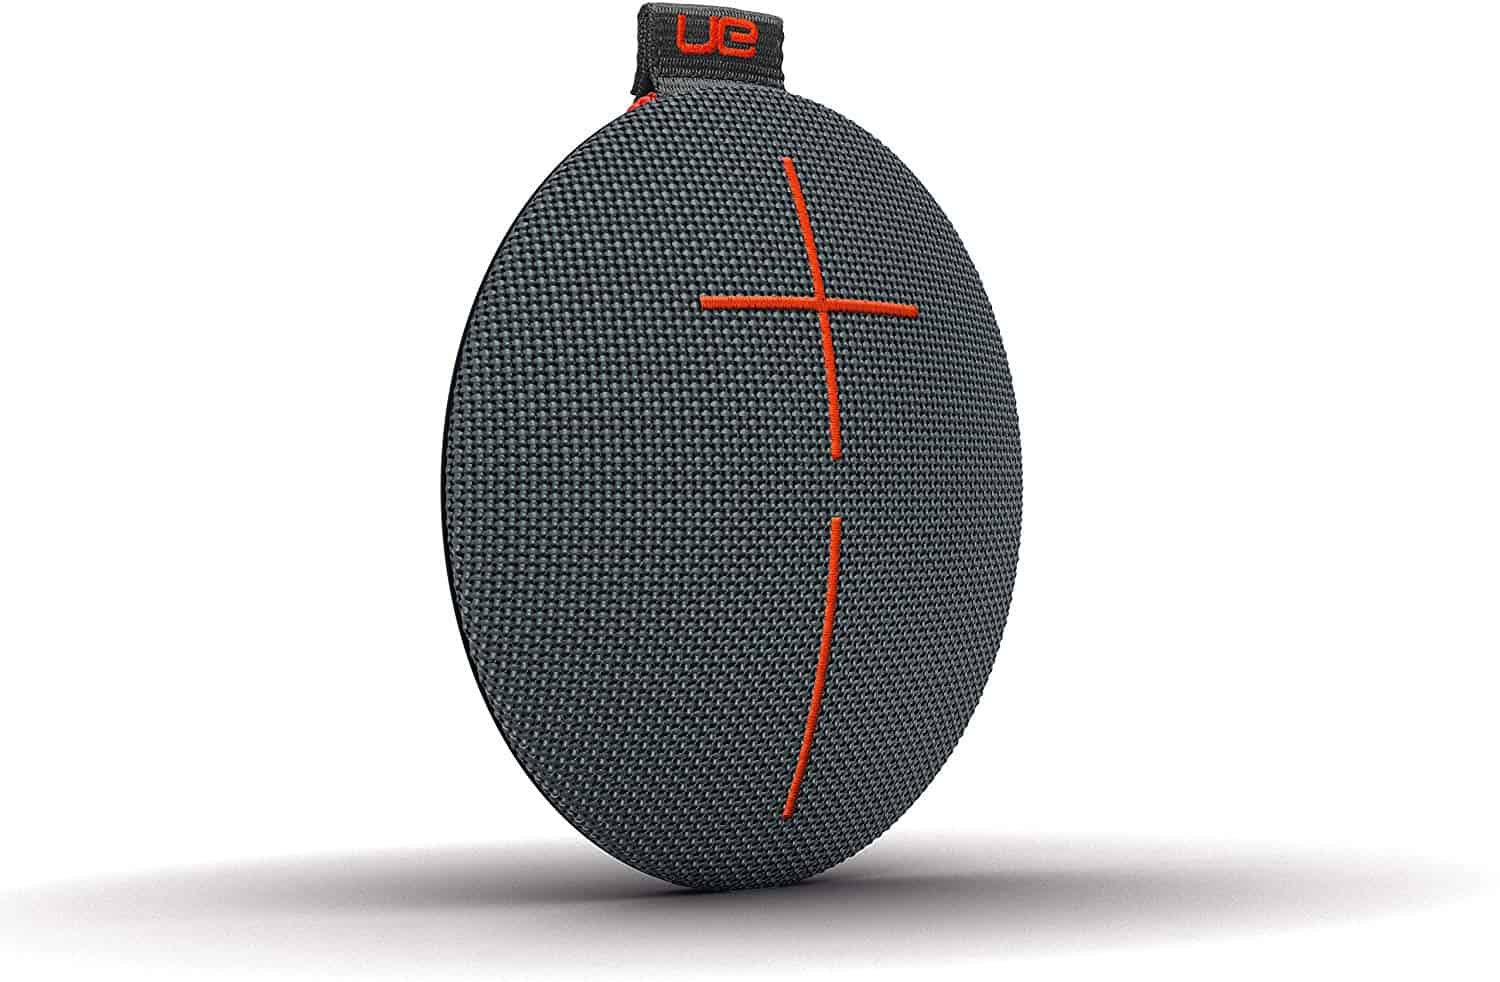 Quality Best Bluetooth Speaker Under $75 To Buy Today